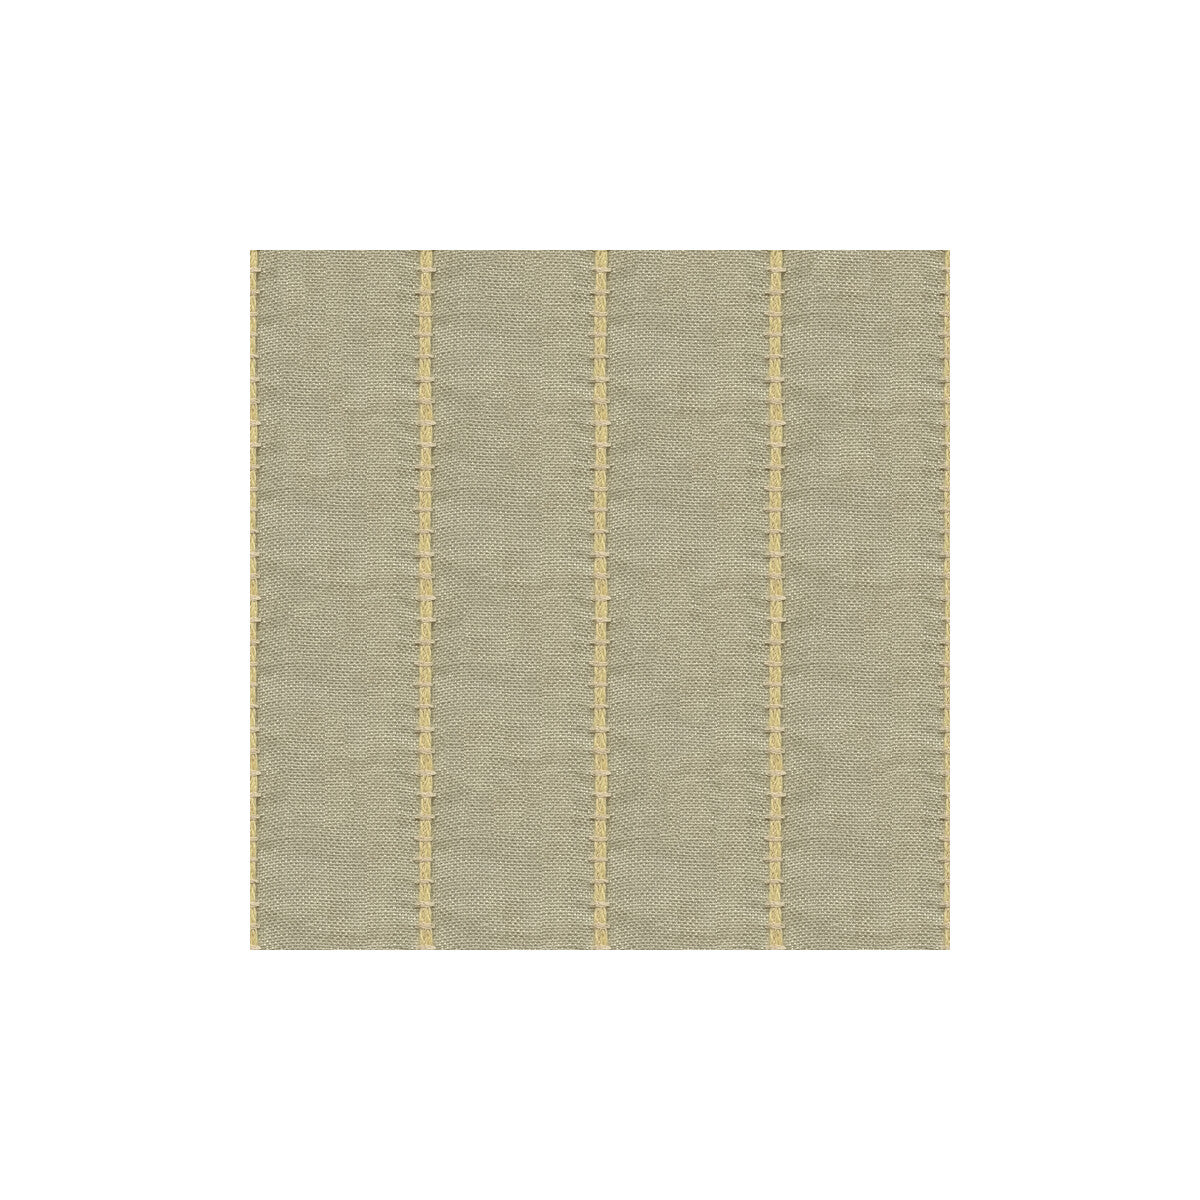 Sonjamb Jute fabric in linen color - pattern 3822.16.0 - by Kravet Design in the Barclay Butera II collection